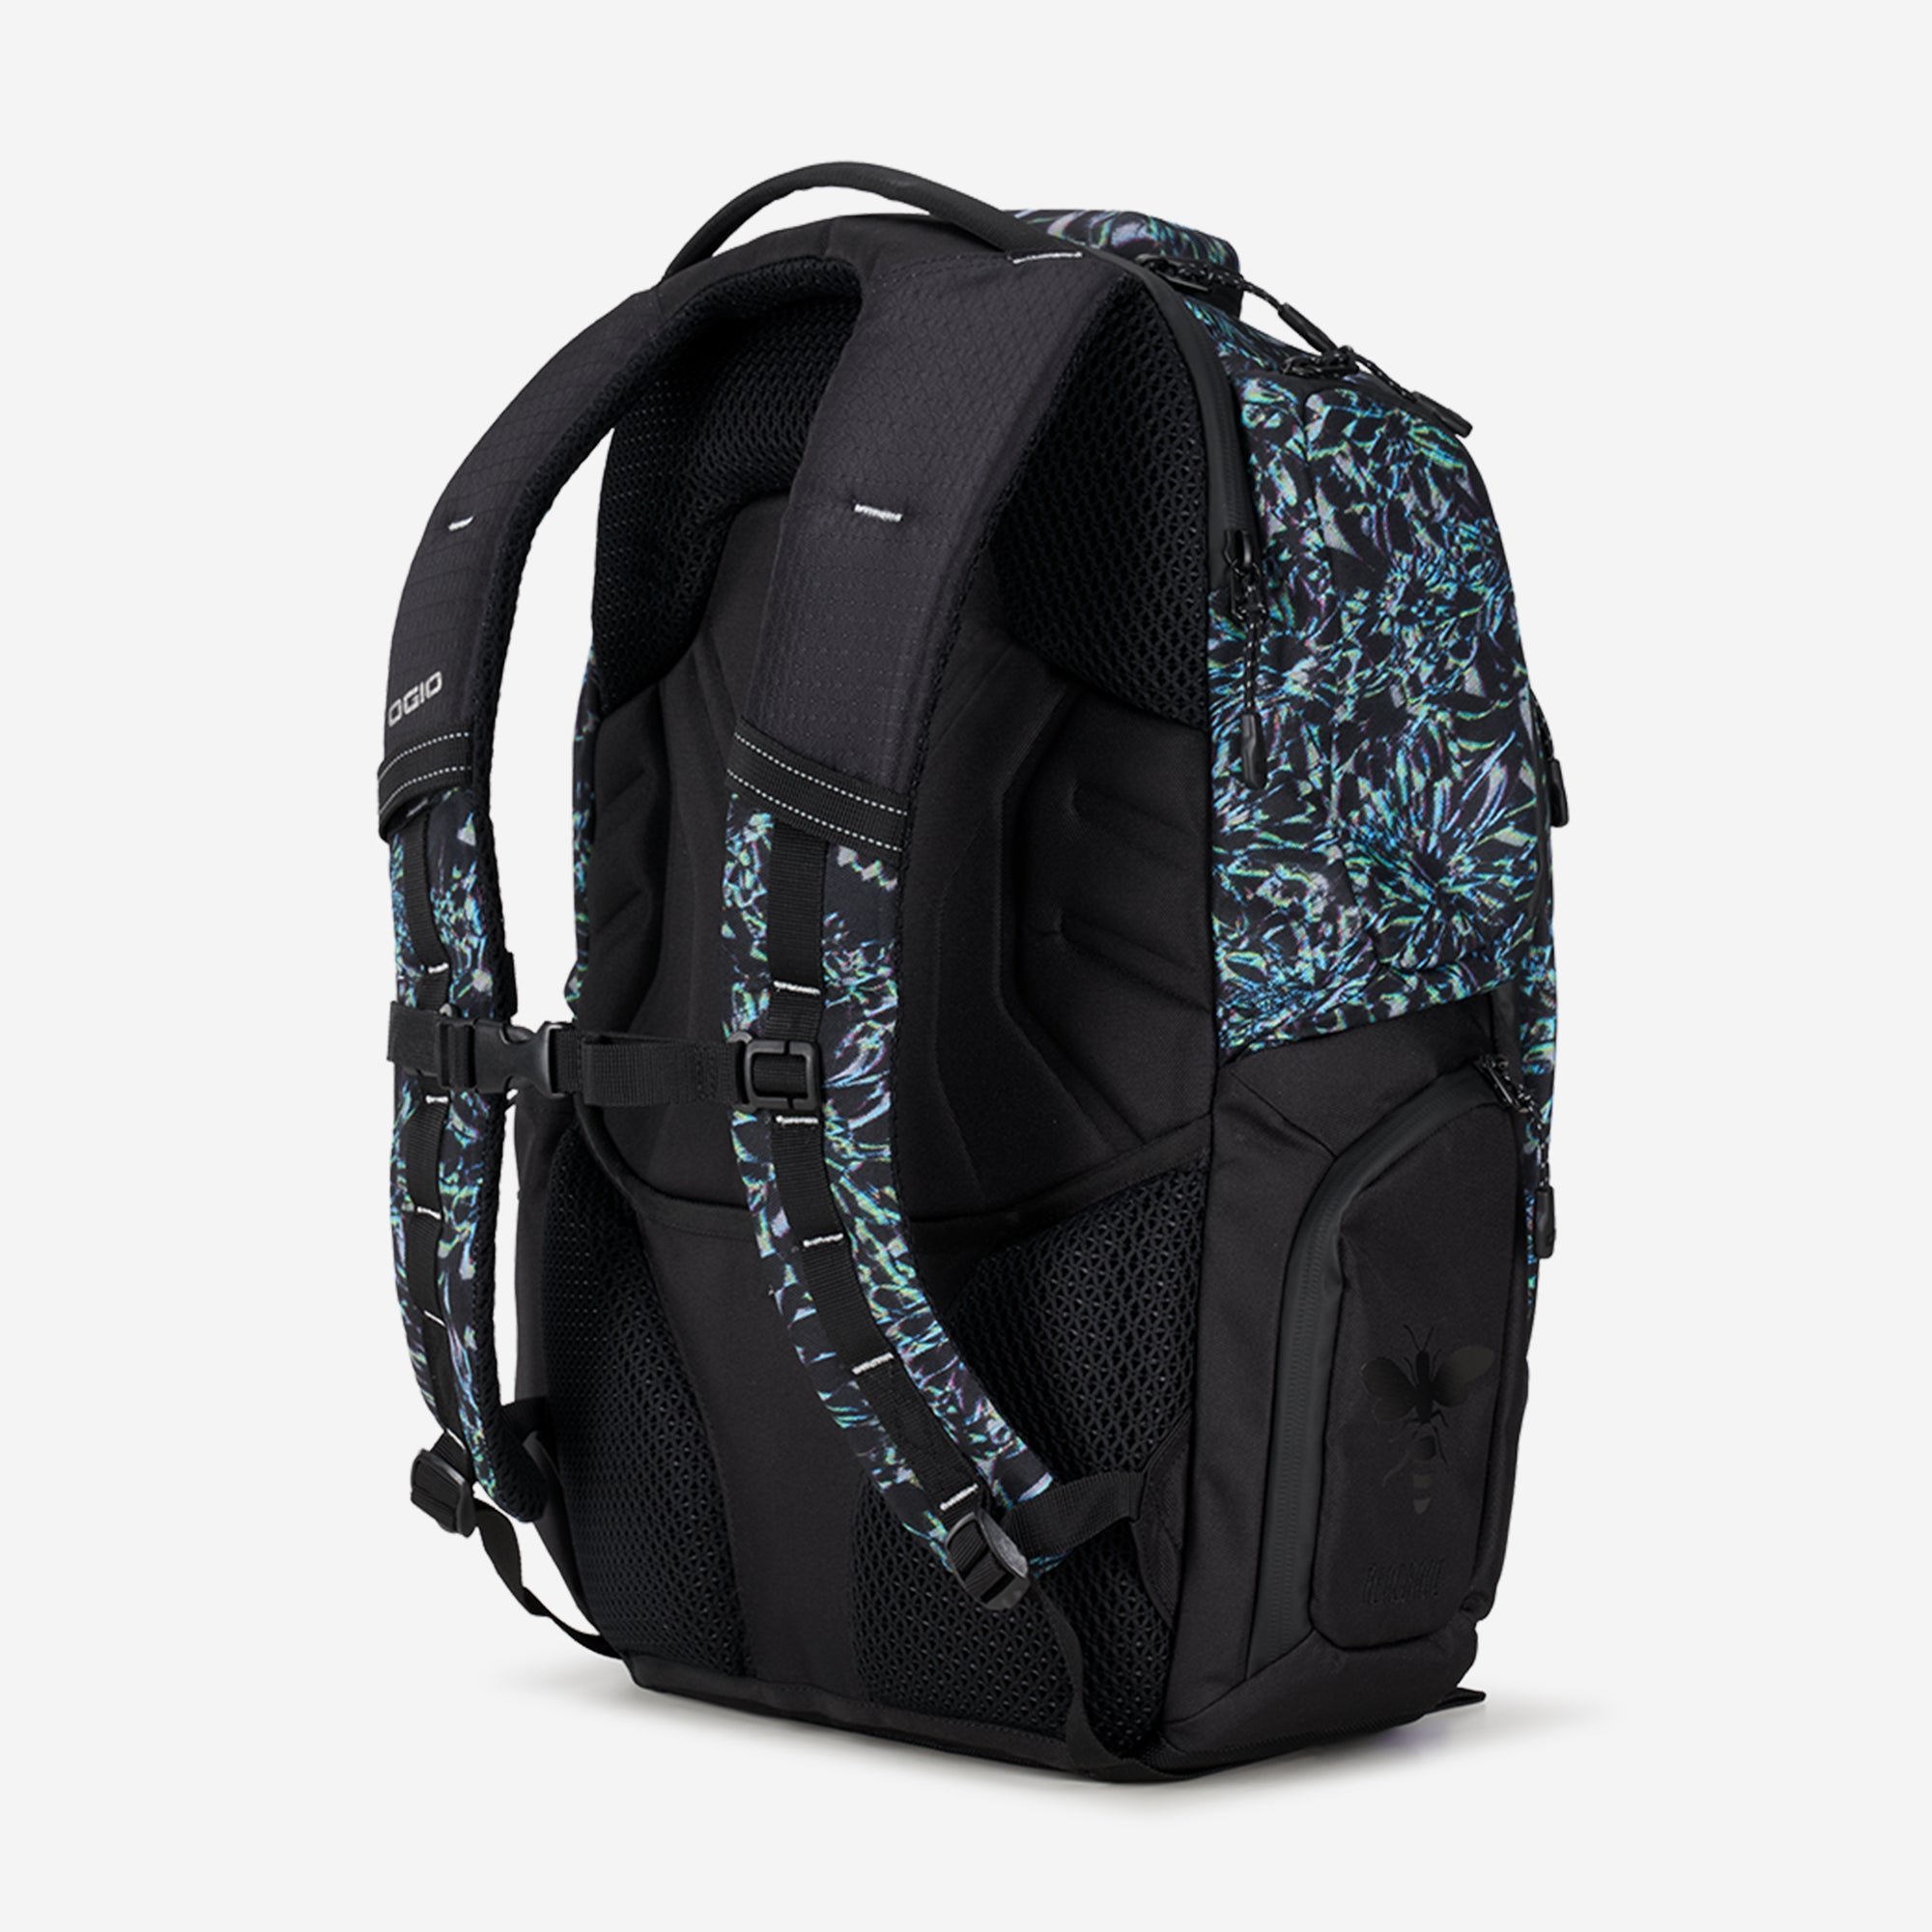 RENEGADE PRO LE BACKPACK